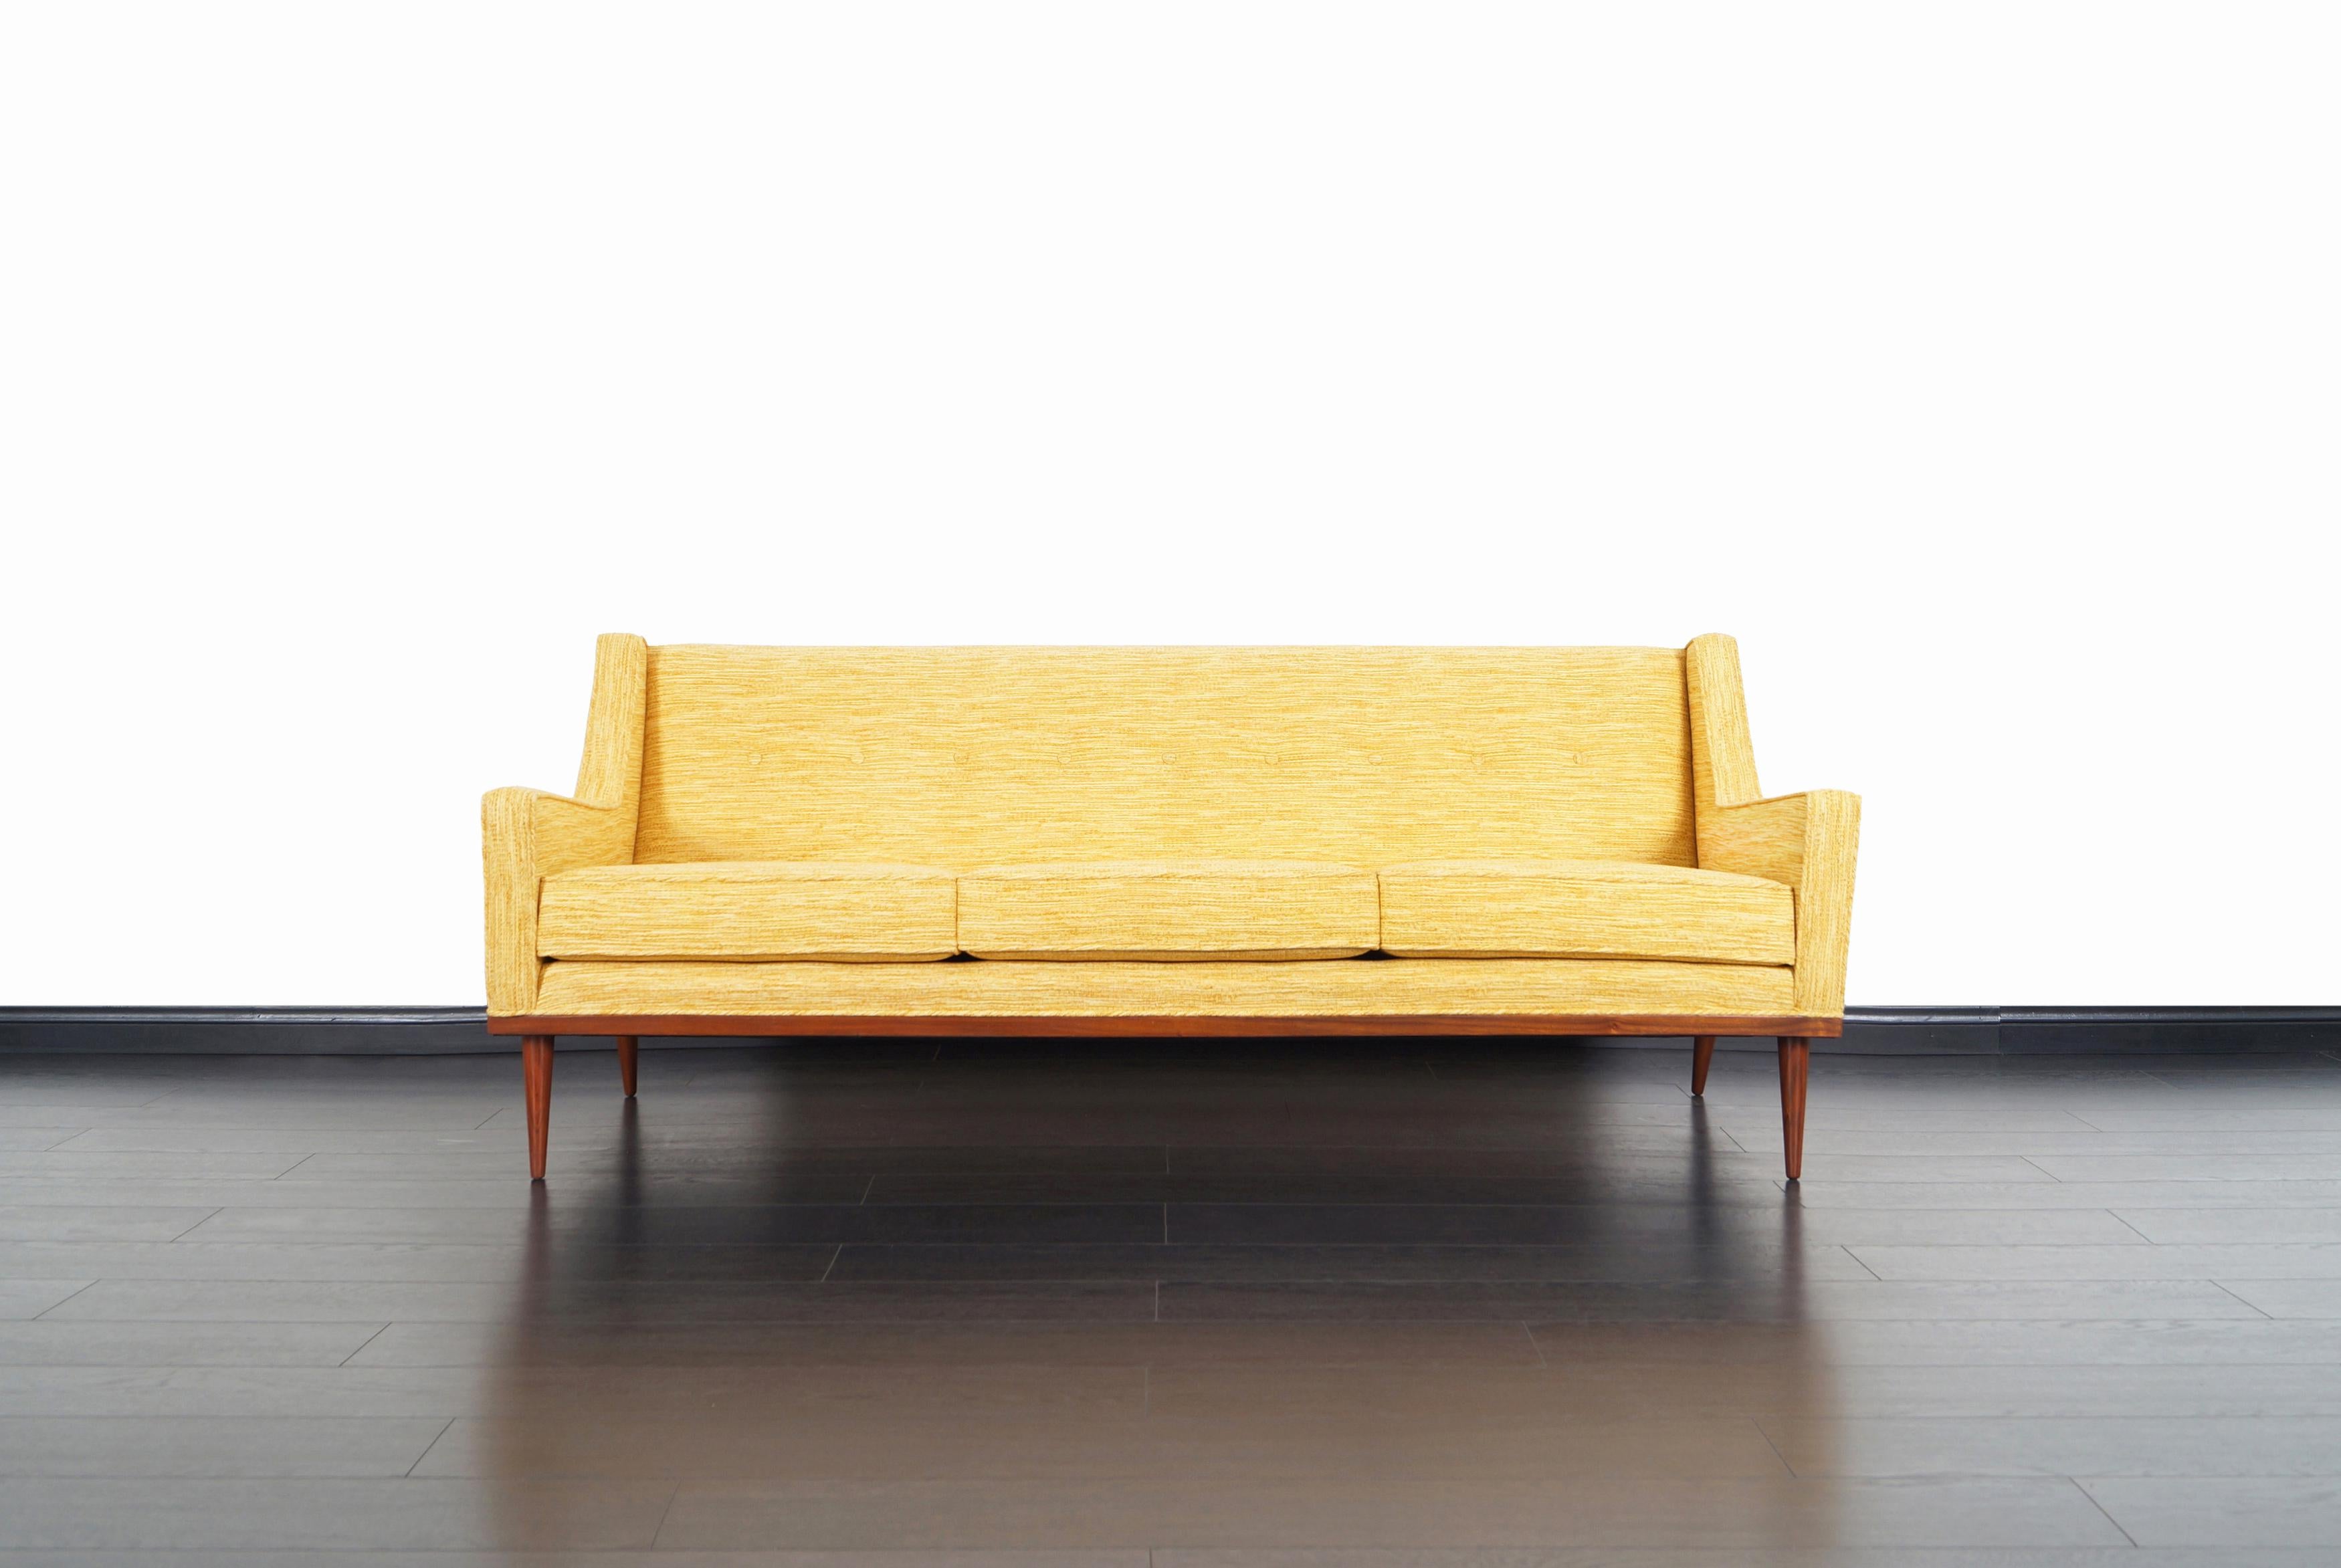 Fabulous mid-century sofa designed by Milo Baughman for James Inc. in the United States, circa 1950s. This sofa has been professionally reupholstered by our expert craftsmen. Features a clean design with sleek angled armrests. The sofa sits on a